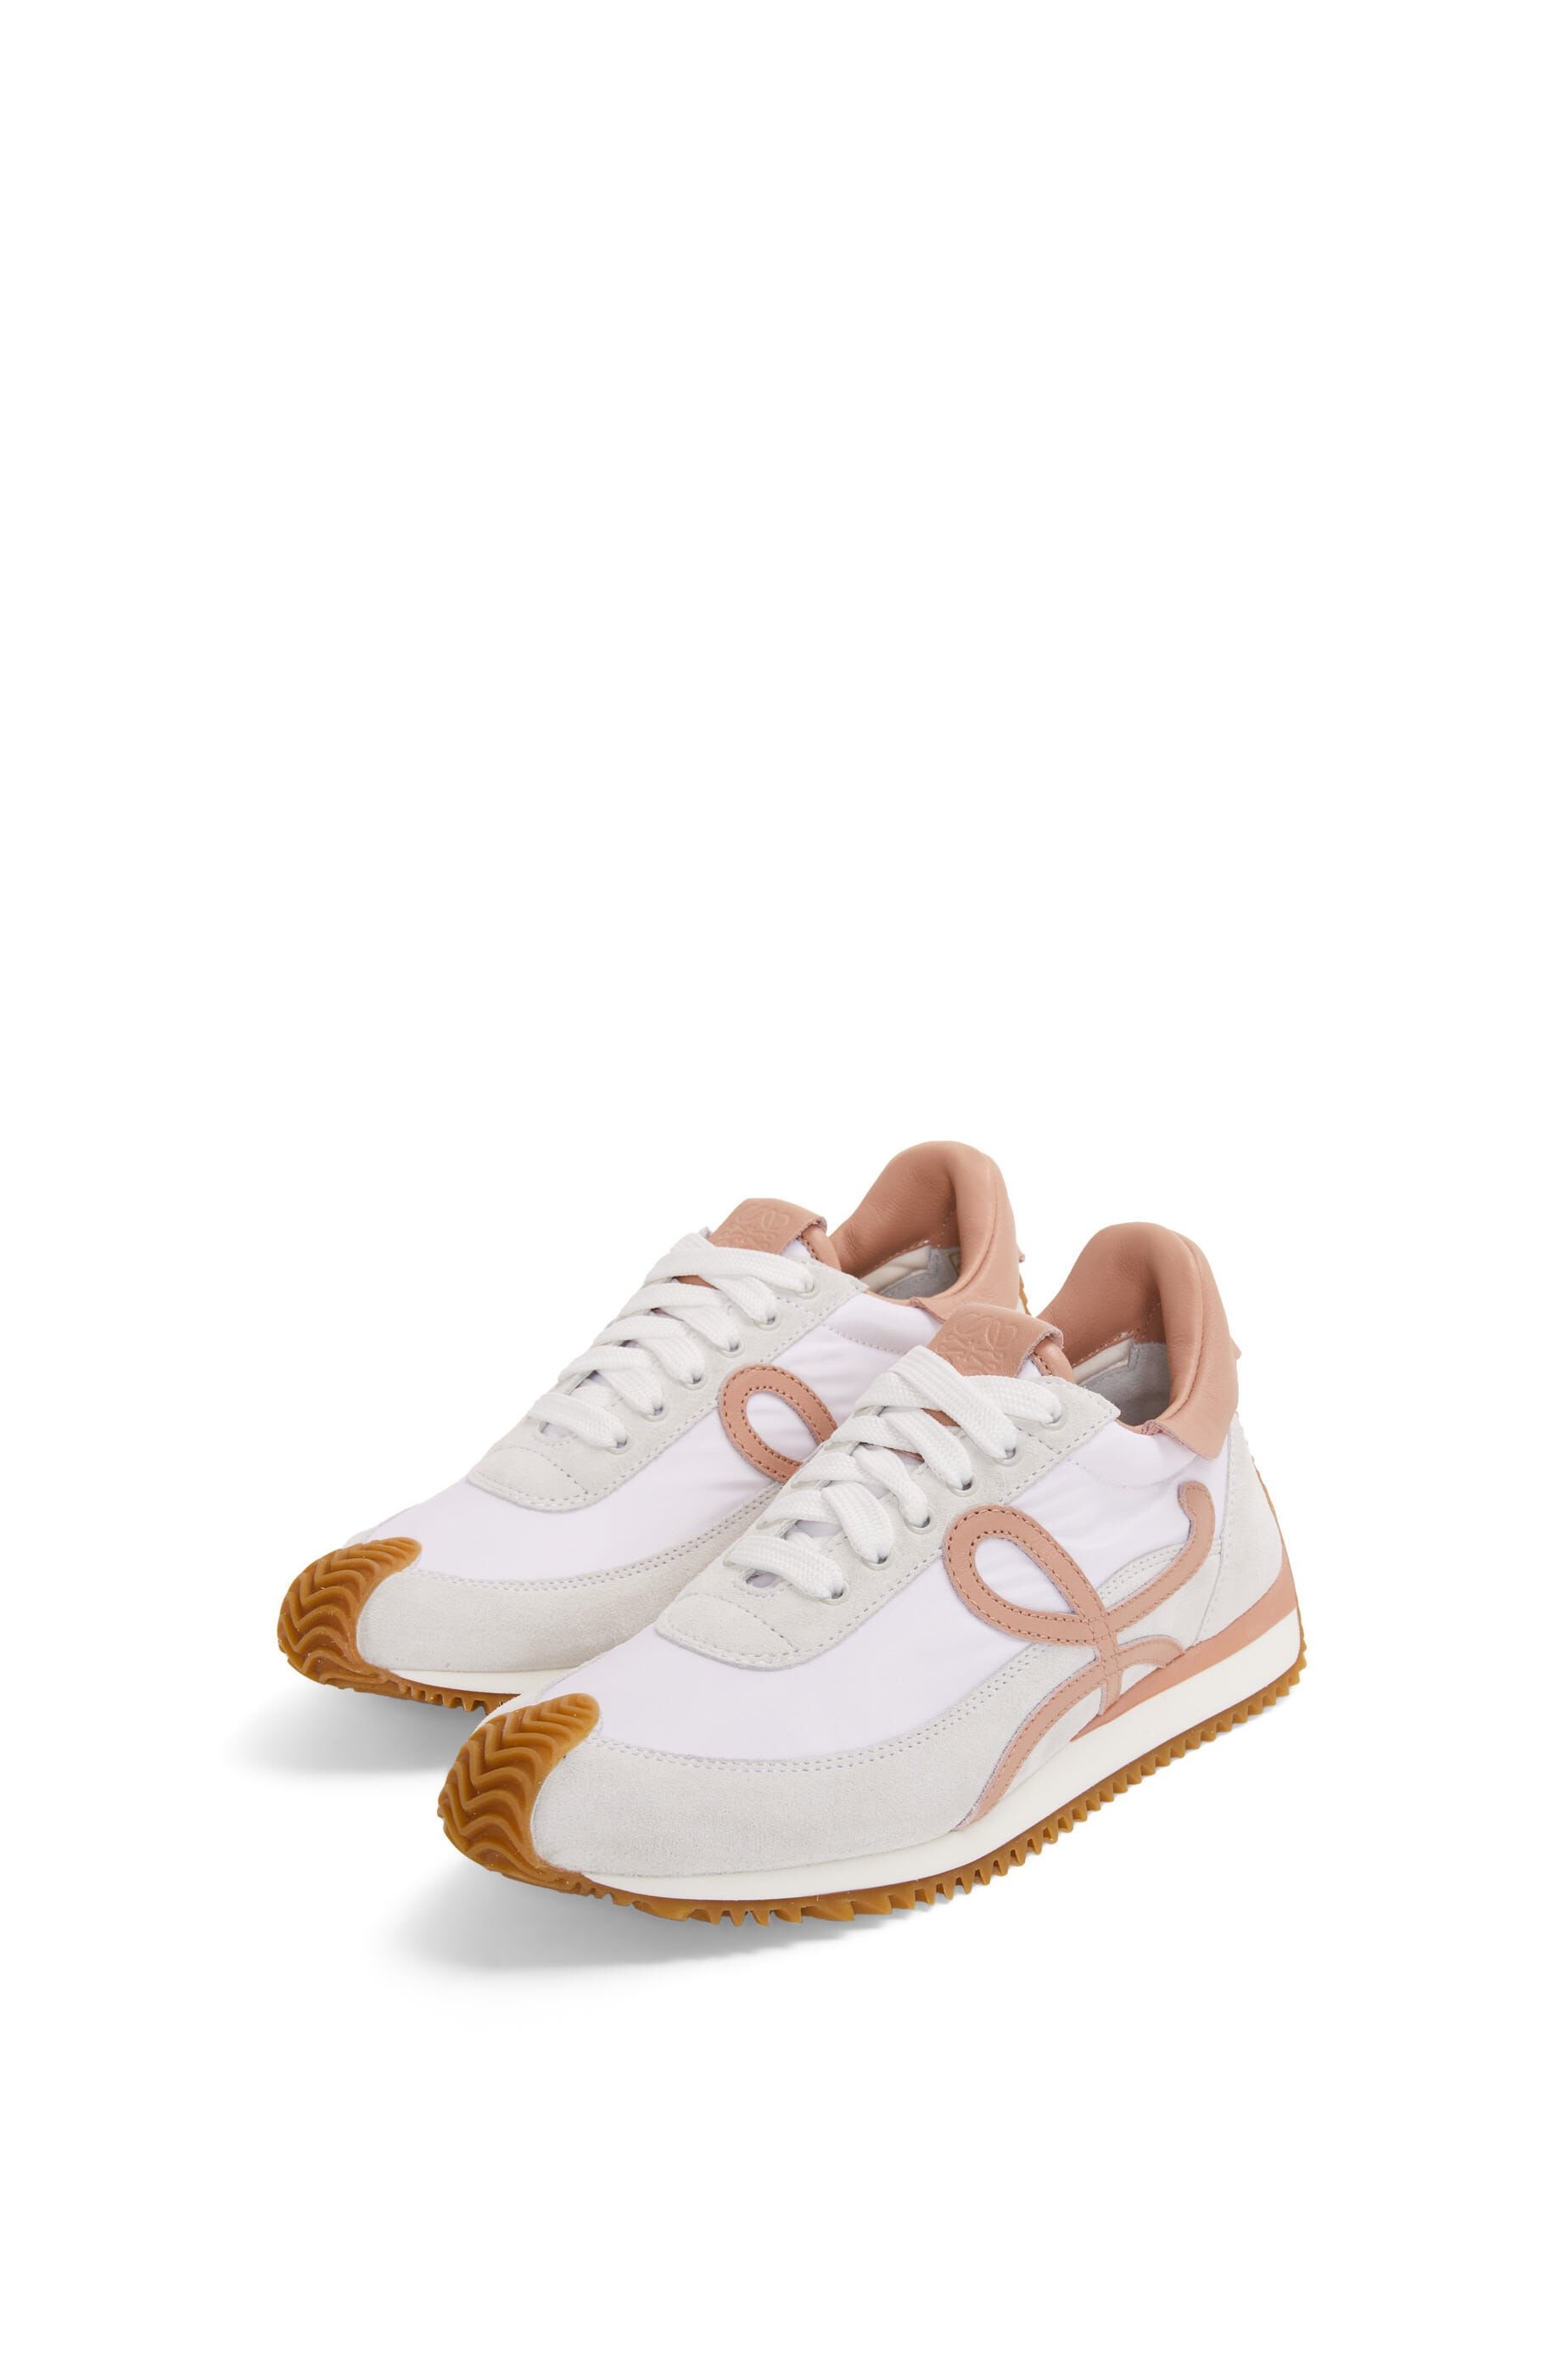 Flow runner in nylon and suede - 3